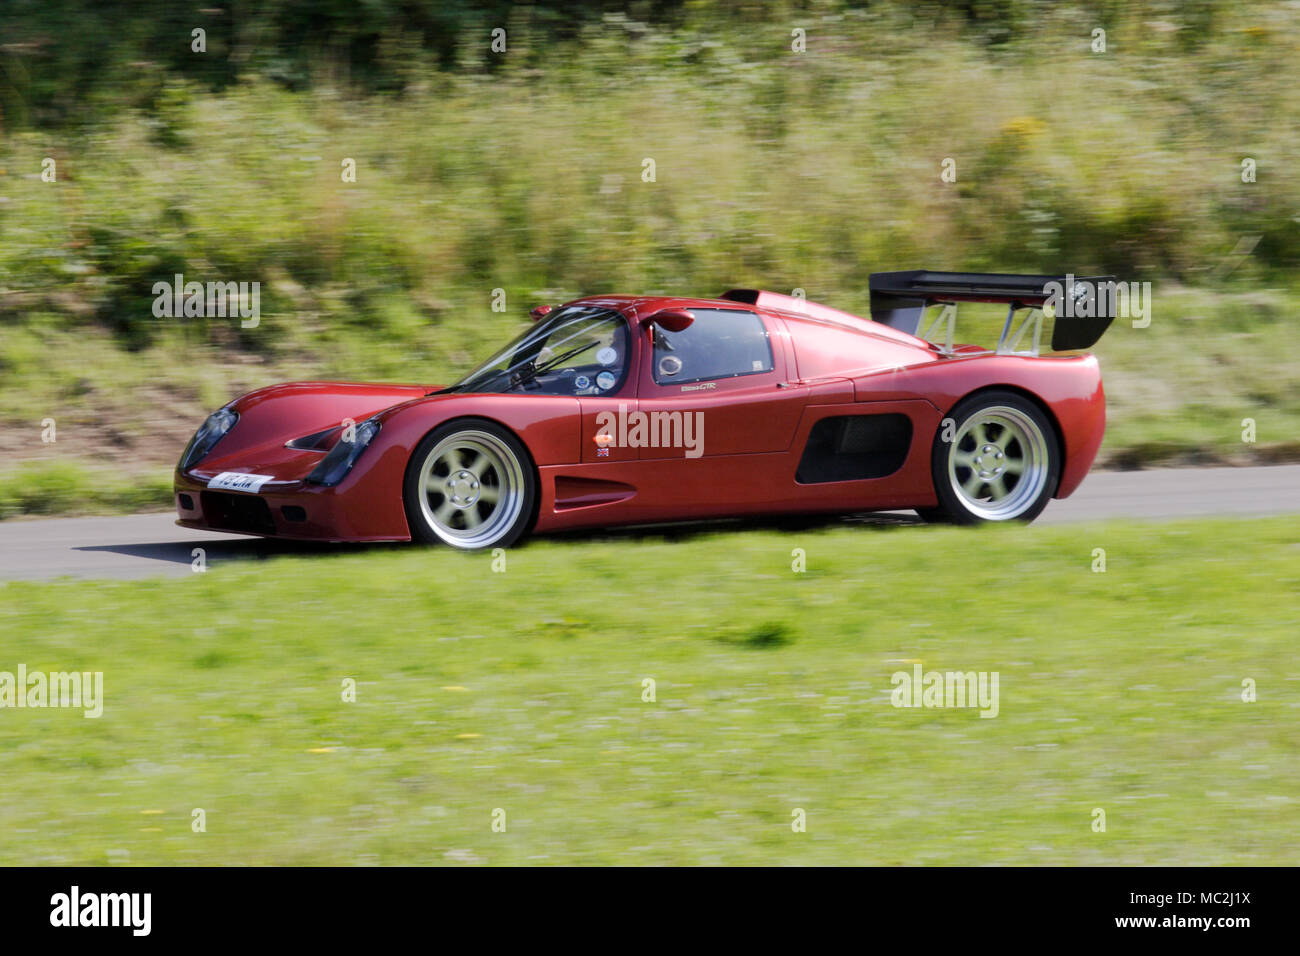 Ultima GTR road legal track racing car driving fast on a country road. Stock Photo